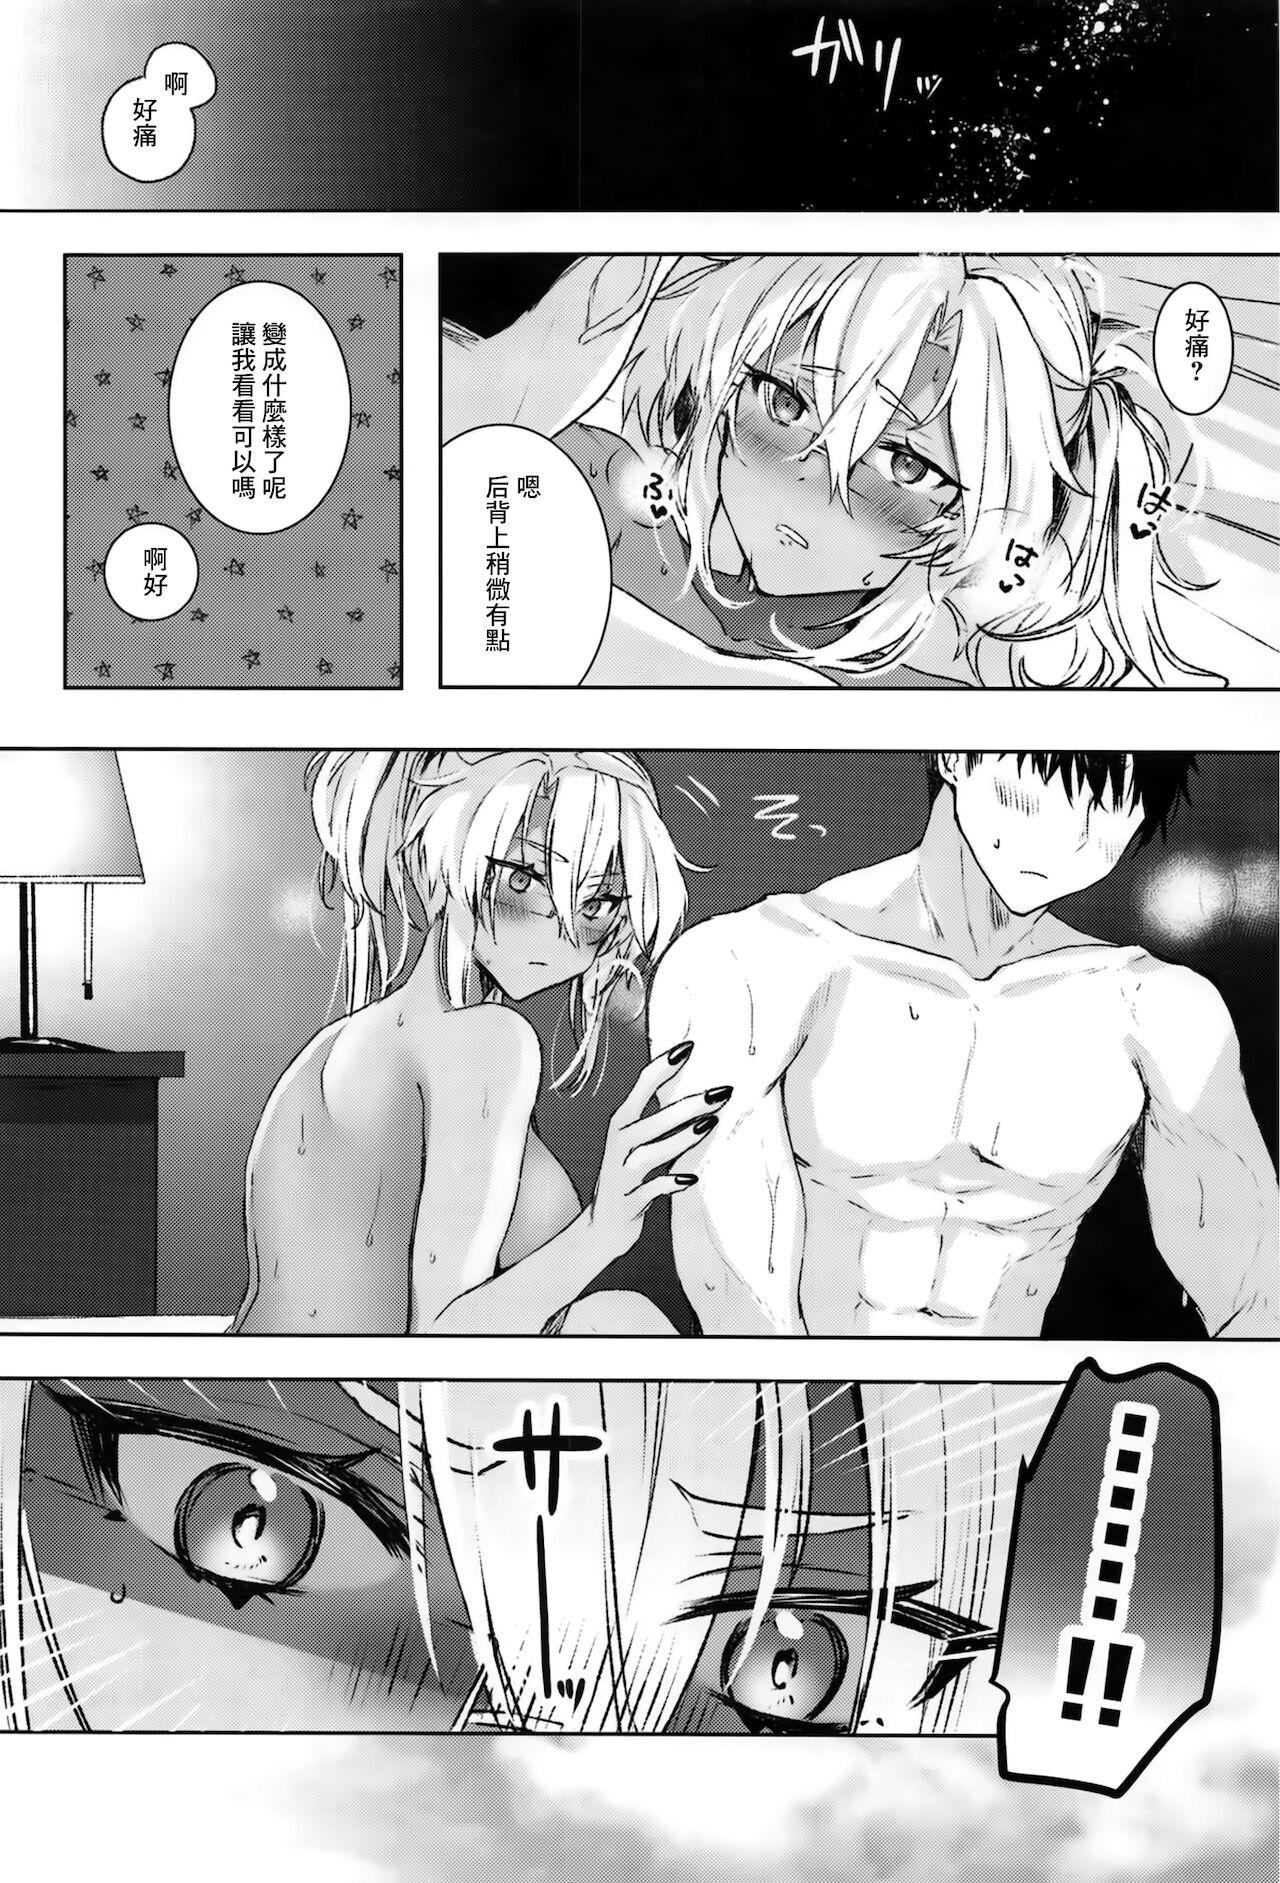 Cheating Wife 武蔵さんの夜事情 秘書艦の匙加減編 - Kantai collection  - Page 3